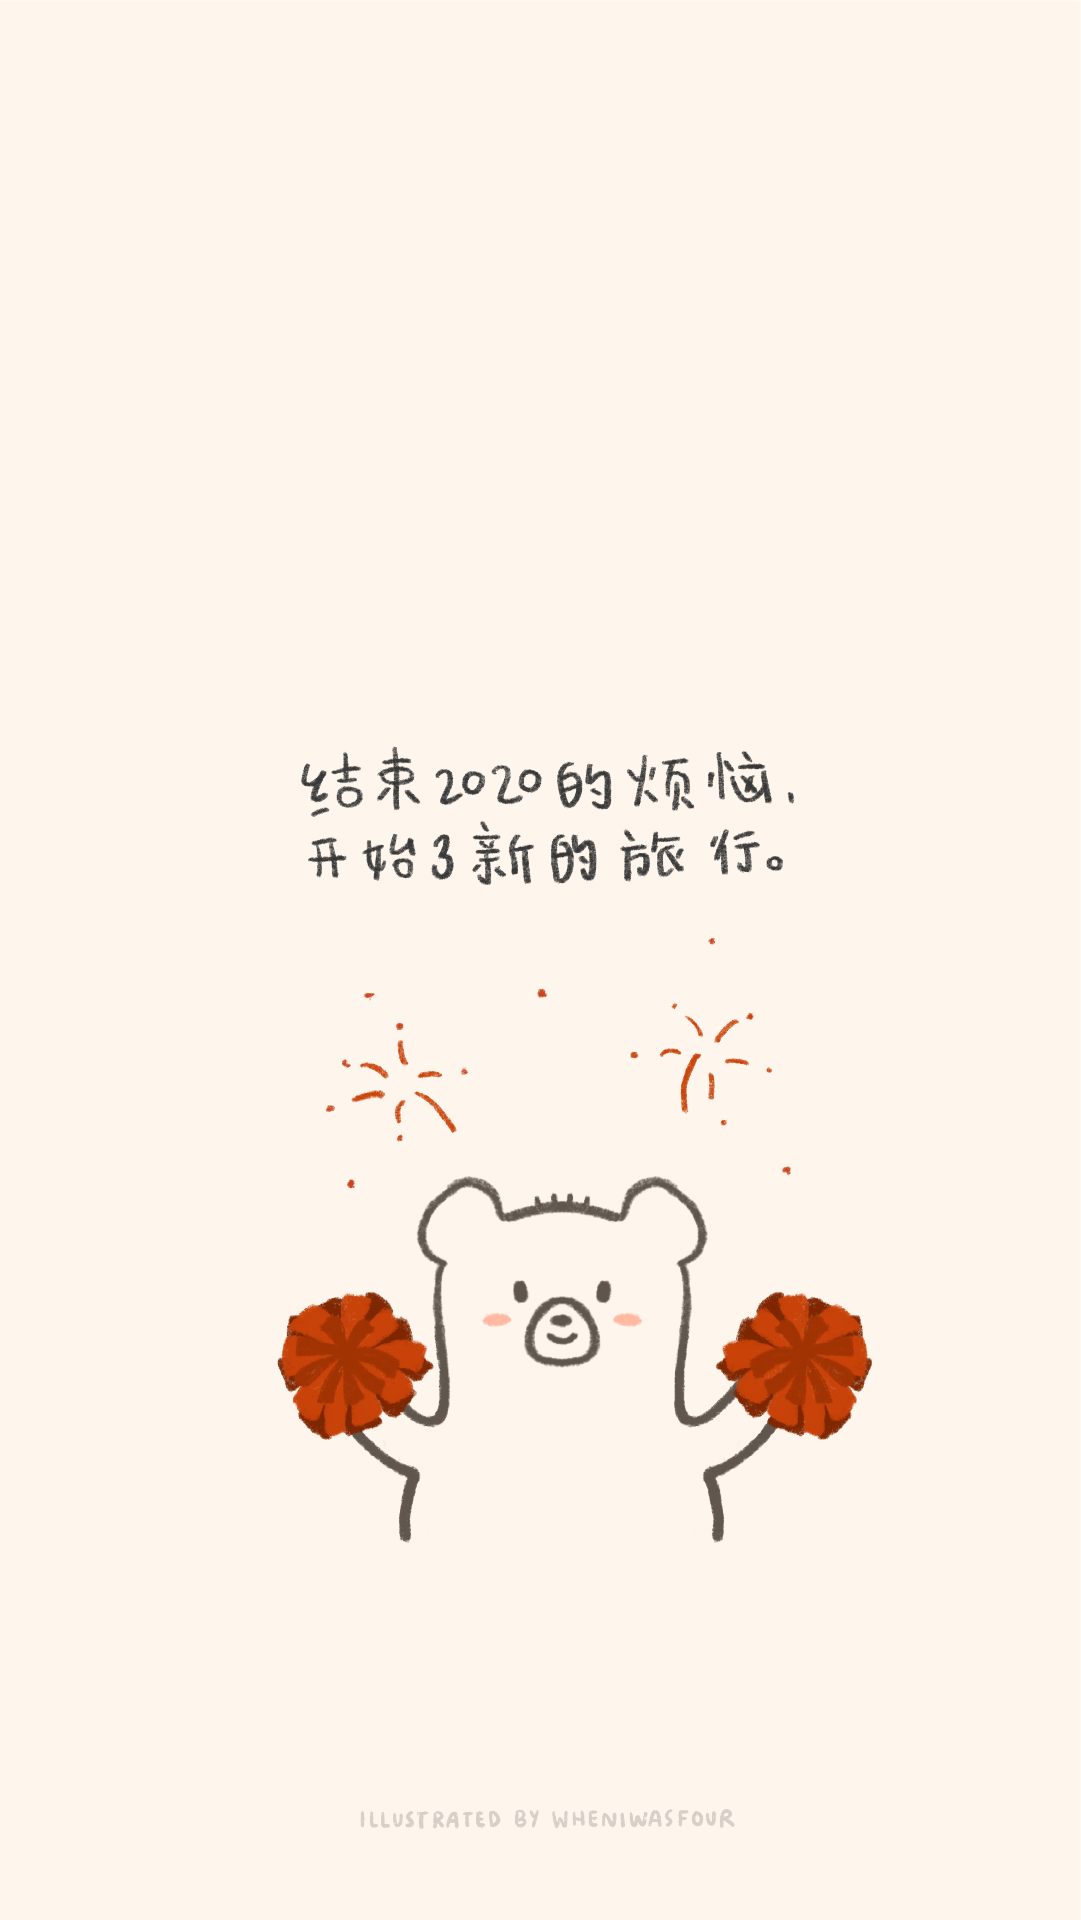 phone wallpaper of a digital illustration of chinese quote about new year new day new journey with a bear holding pom poms and fireworks